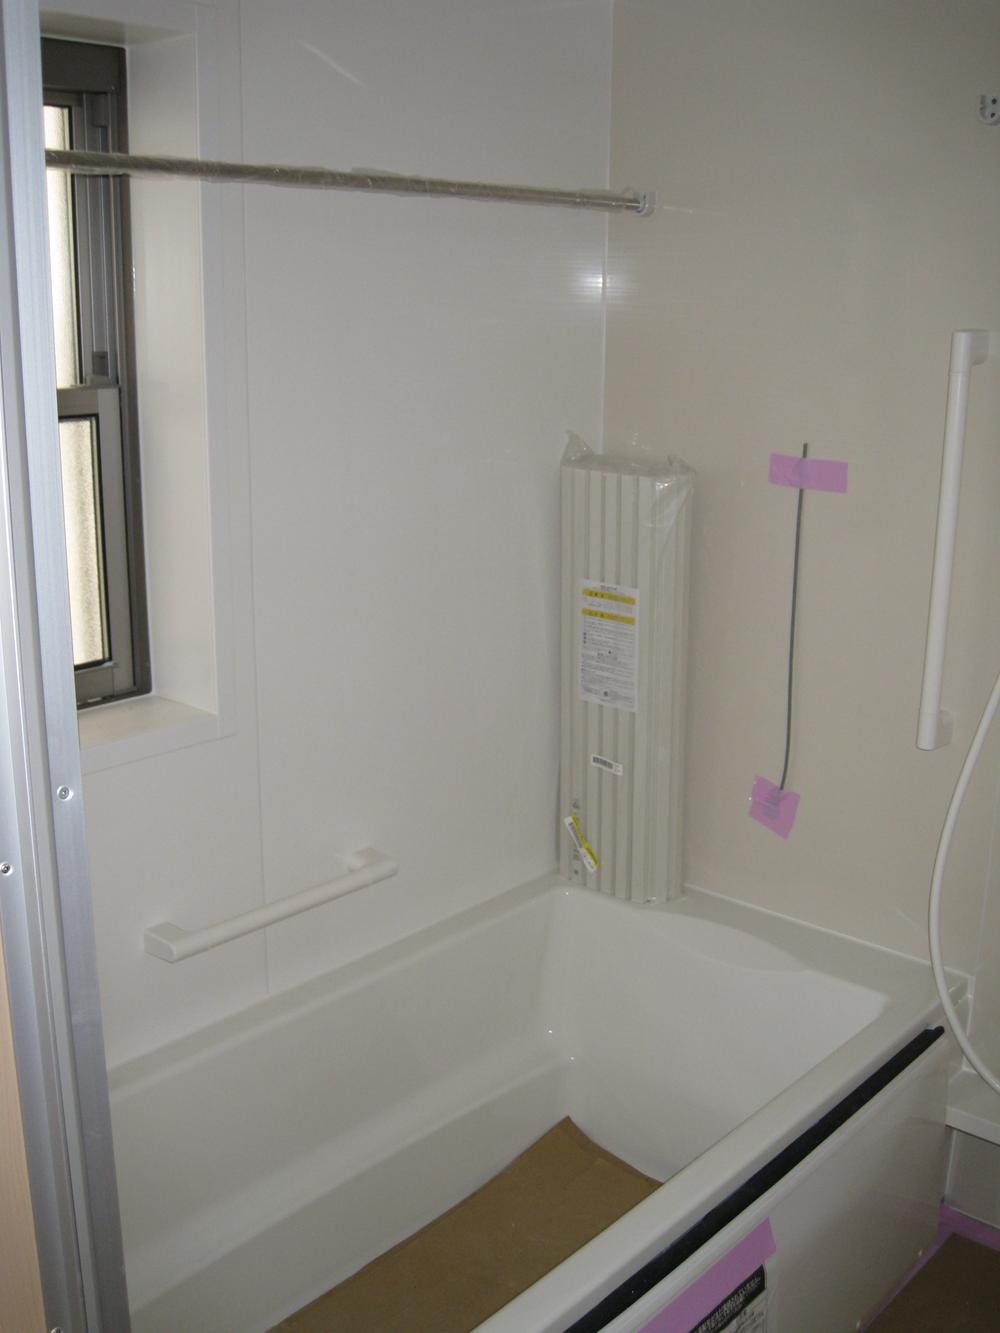 Bathroom. Indoor (12 May 2013) Shooting There is a unit bus window of 1 pyeong type Bright ventilation good is.